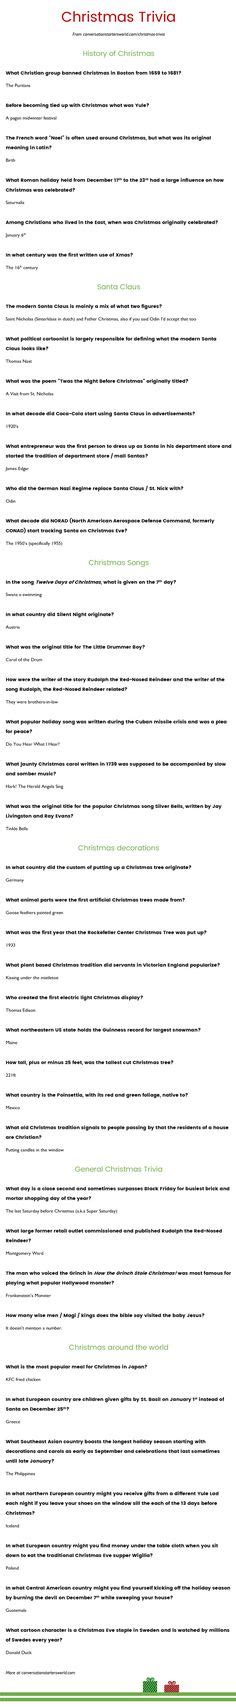 The 25 Best Christmas Trivia Questions Ideas On Pinterest Christmas